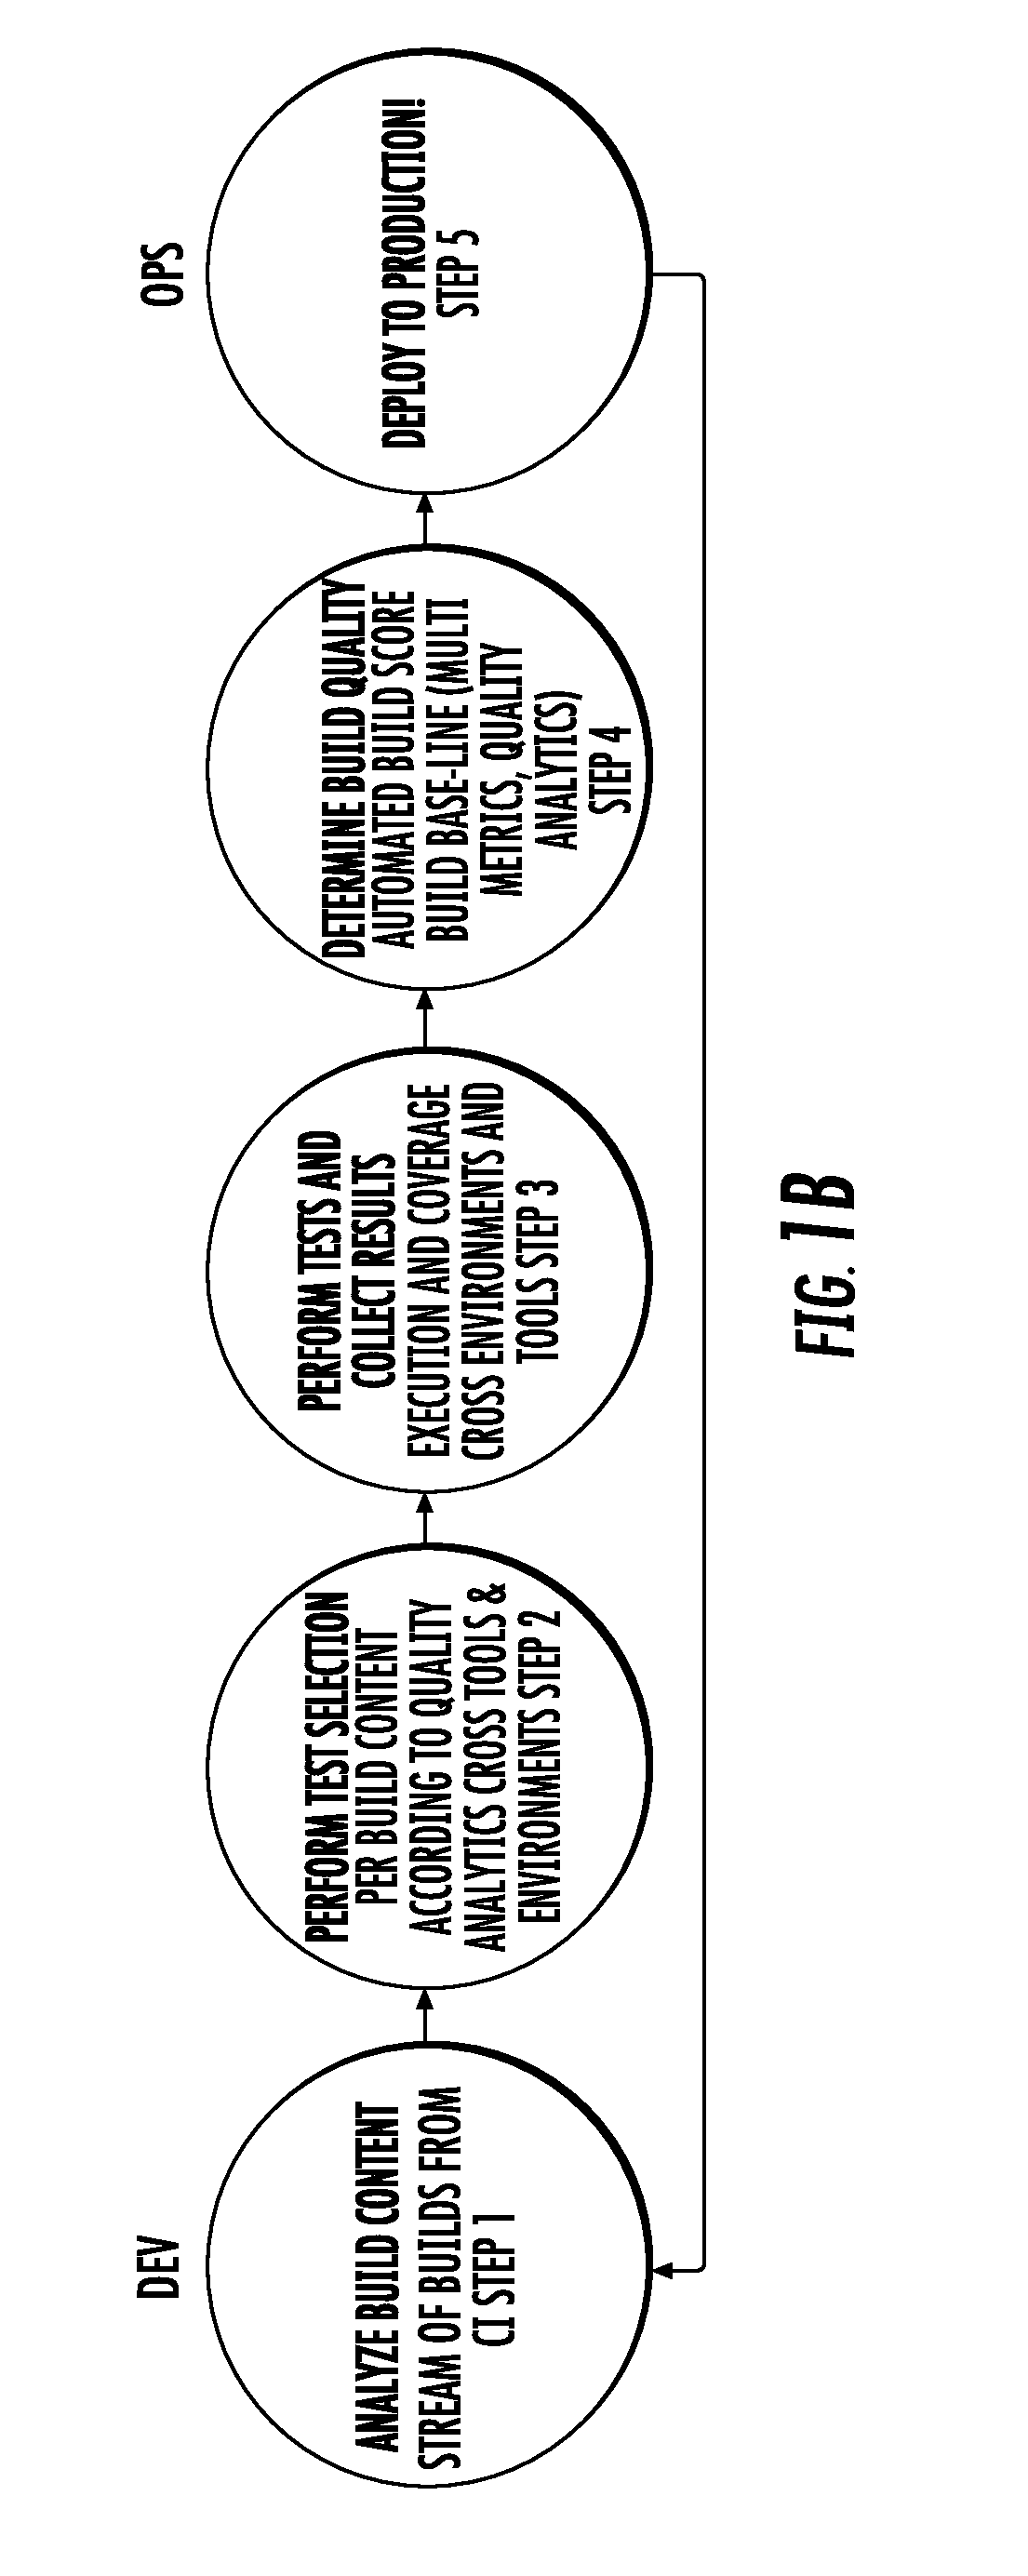 System and method for continuous testing and delivery of software